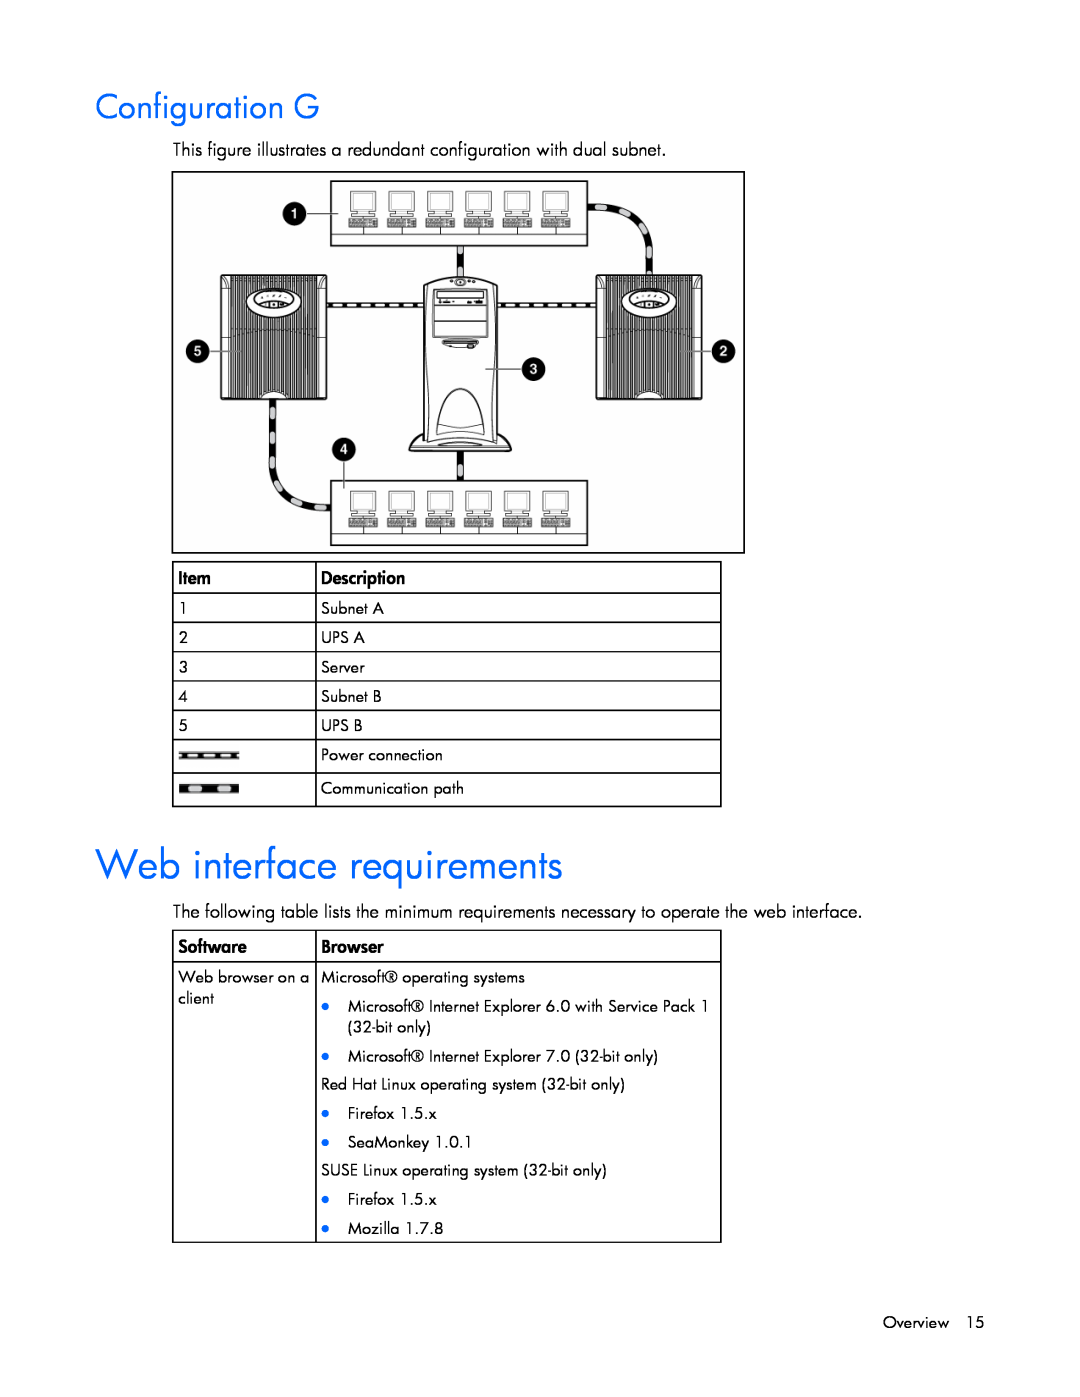 HP A1354A, A6584A, A1353A, A1356A, J4373A, J4370A, J4367A manual Web interface requirements, Configuration G 